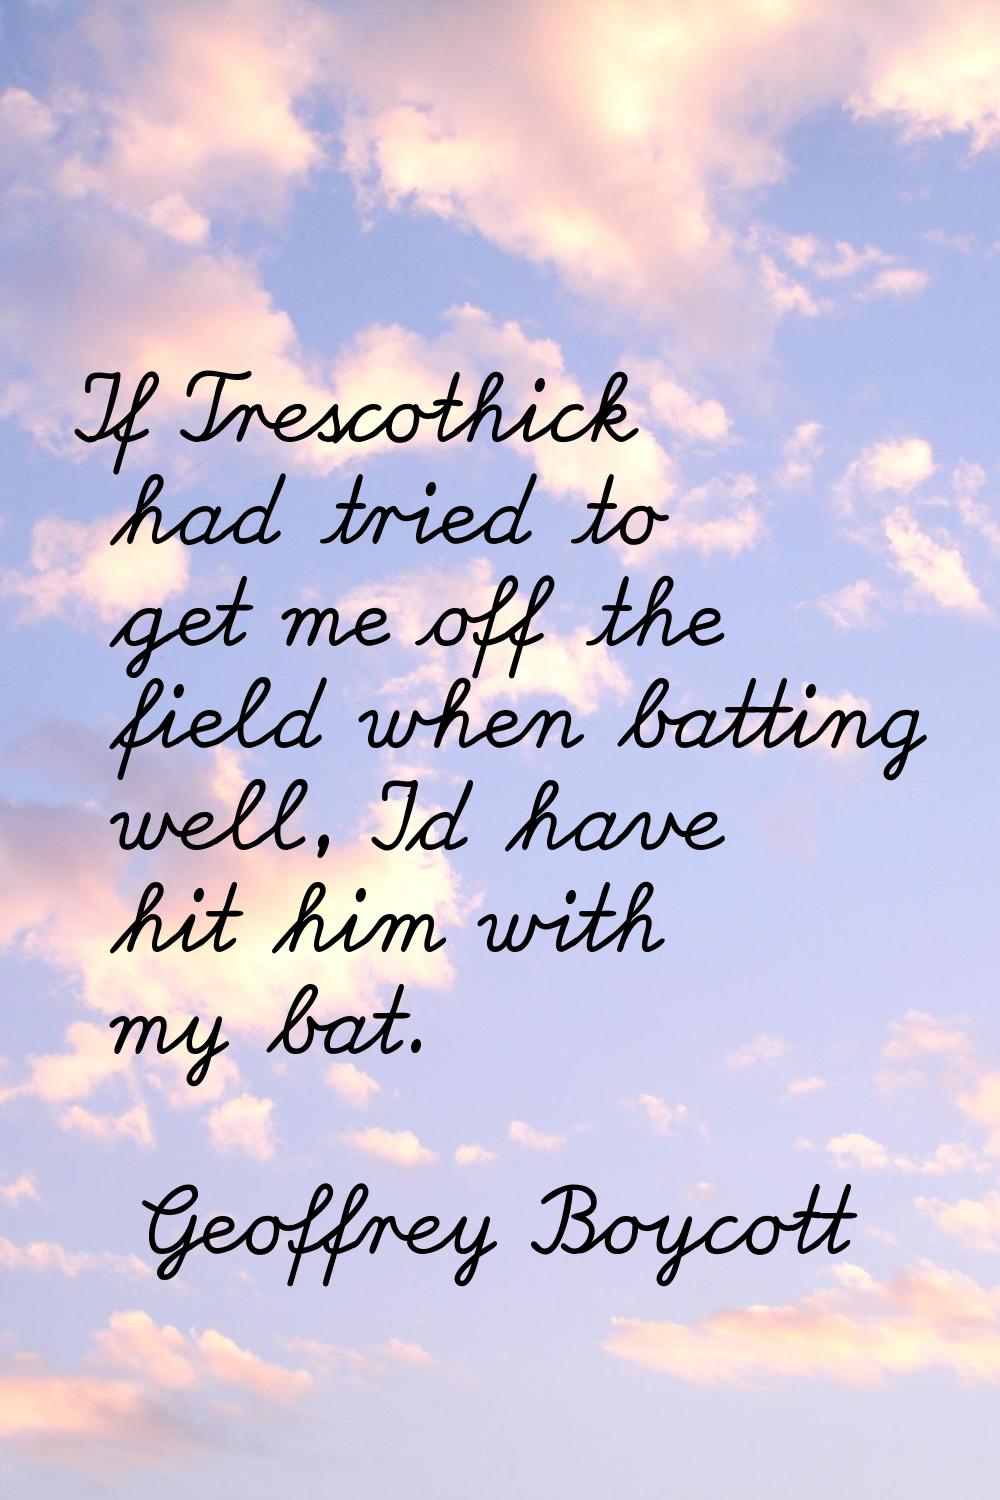 If Trescothick had tried to get me off the field when batting well, I'd have hit him with my bat.